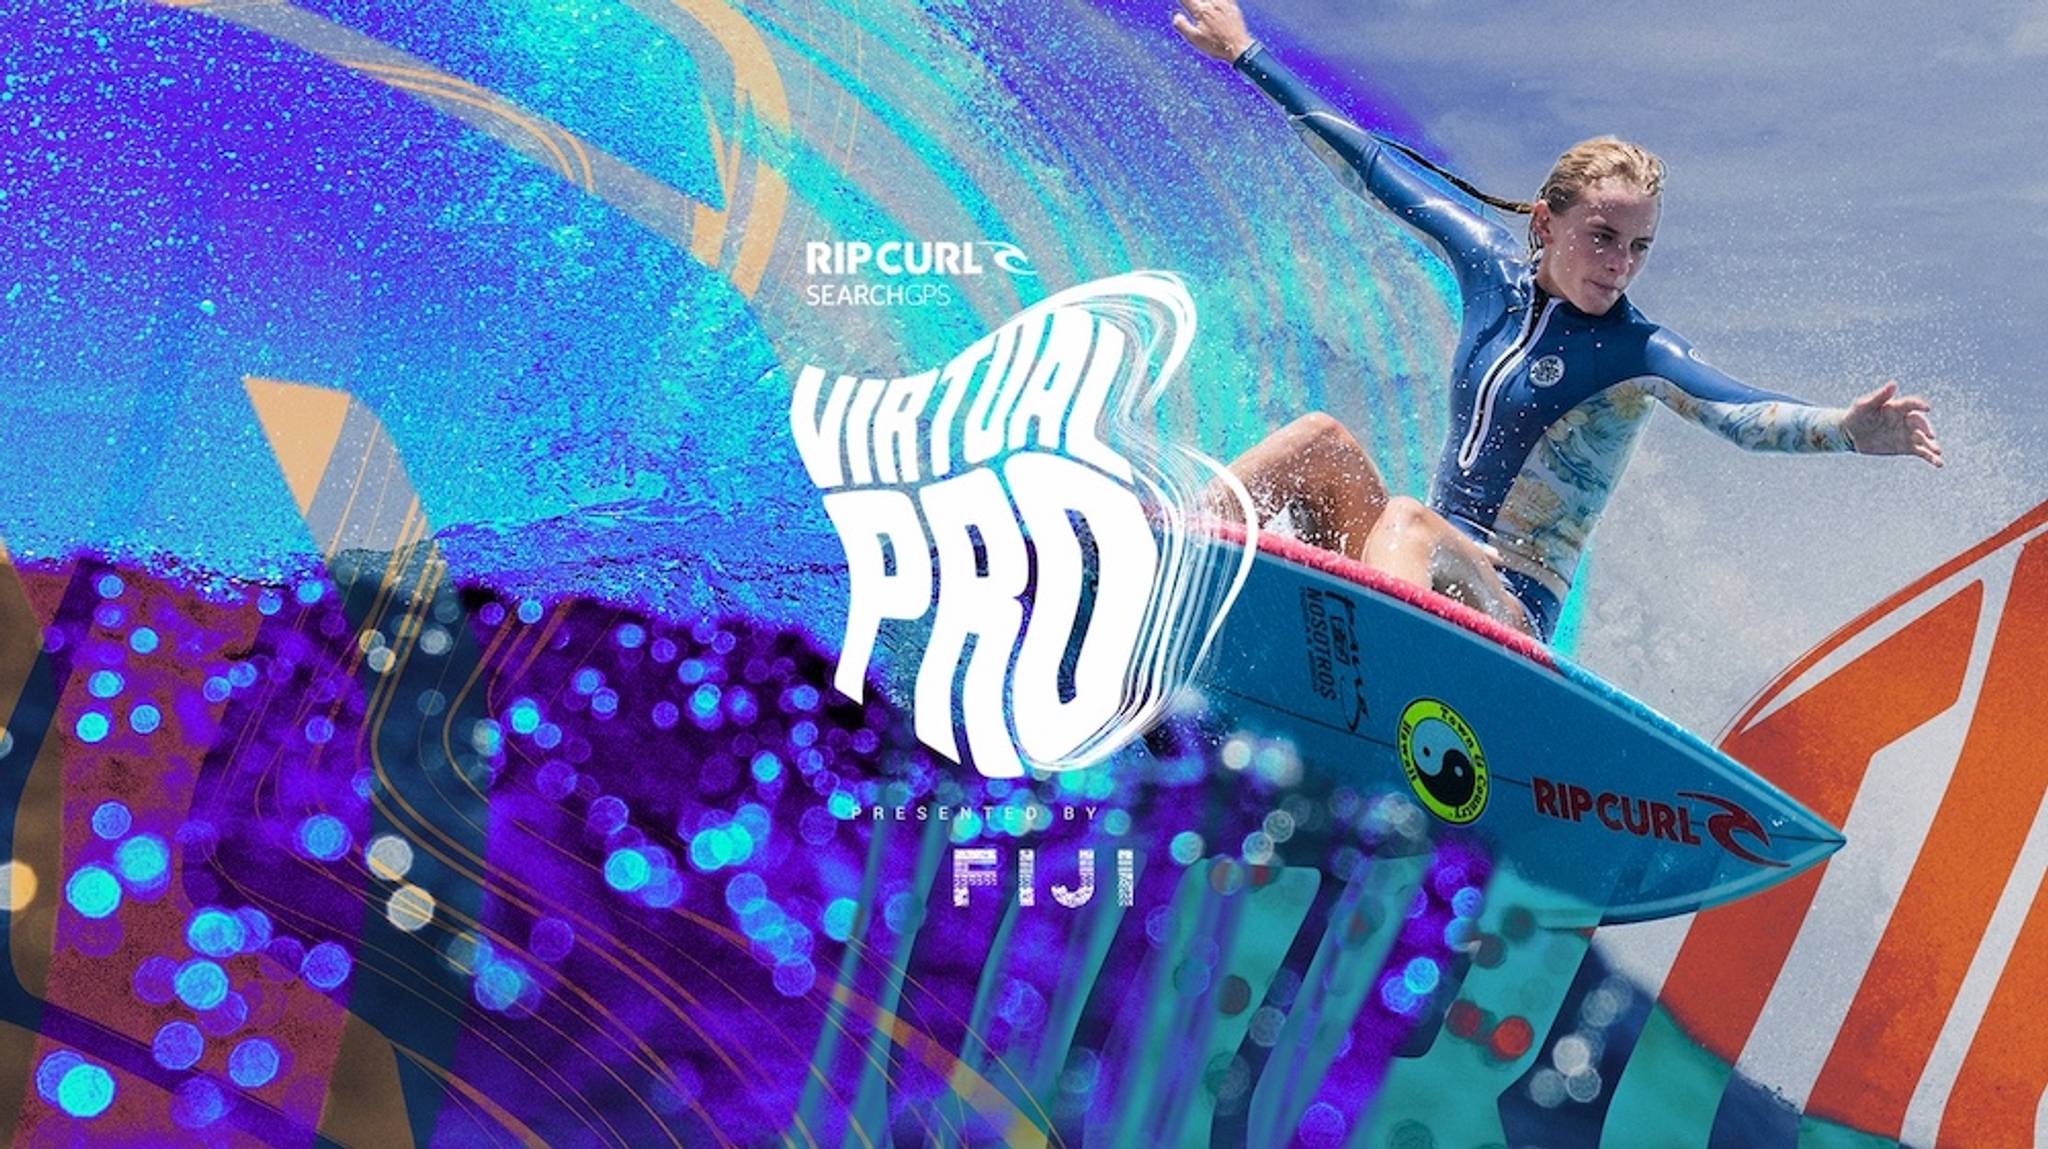 Rip Curl rides the wave of data-backed exercise inspo